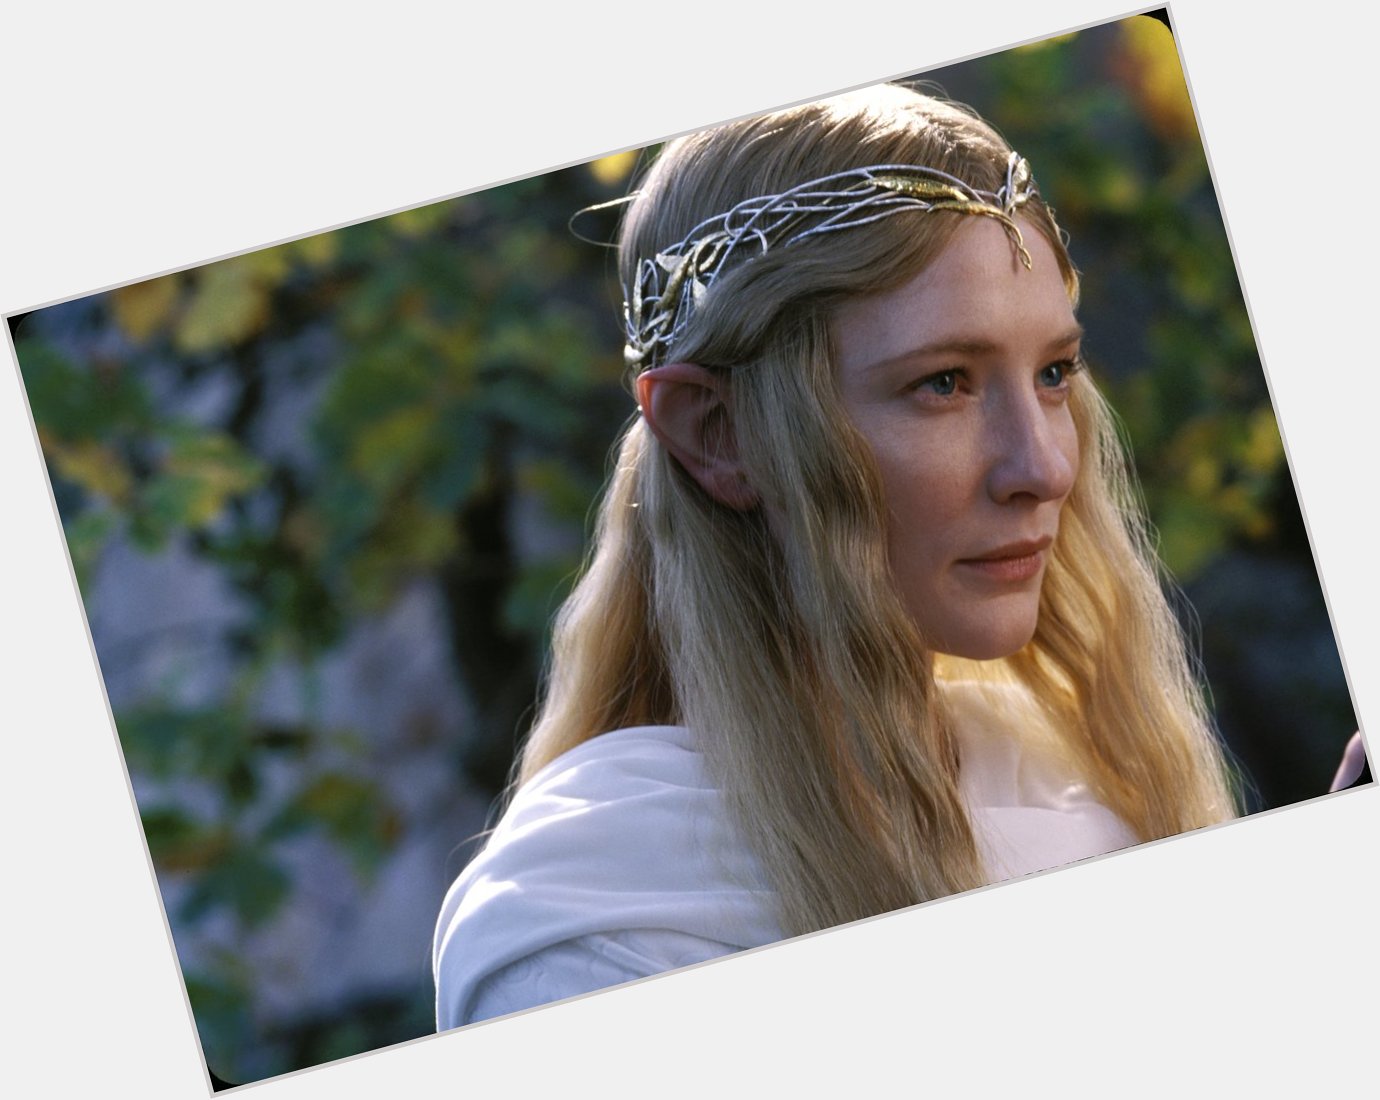 Wishing our Galadriel, Cate Blanchett a very Happy Birthday!  